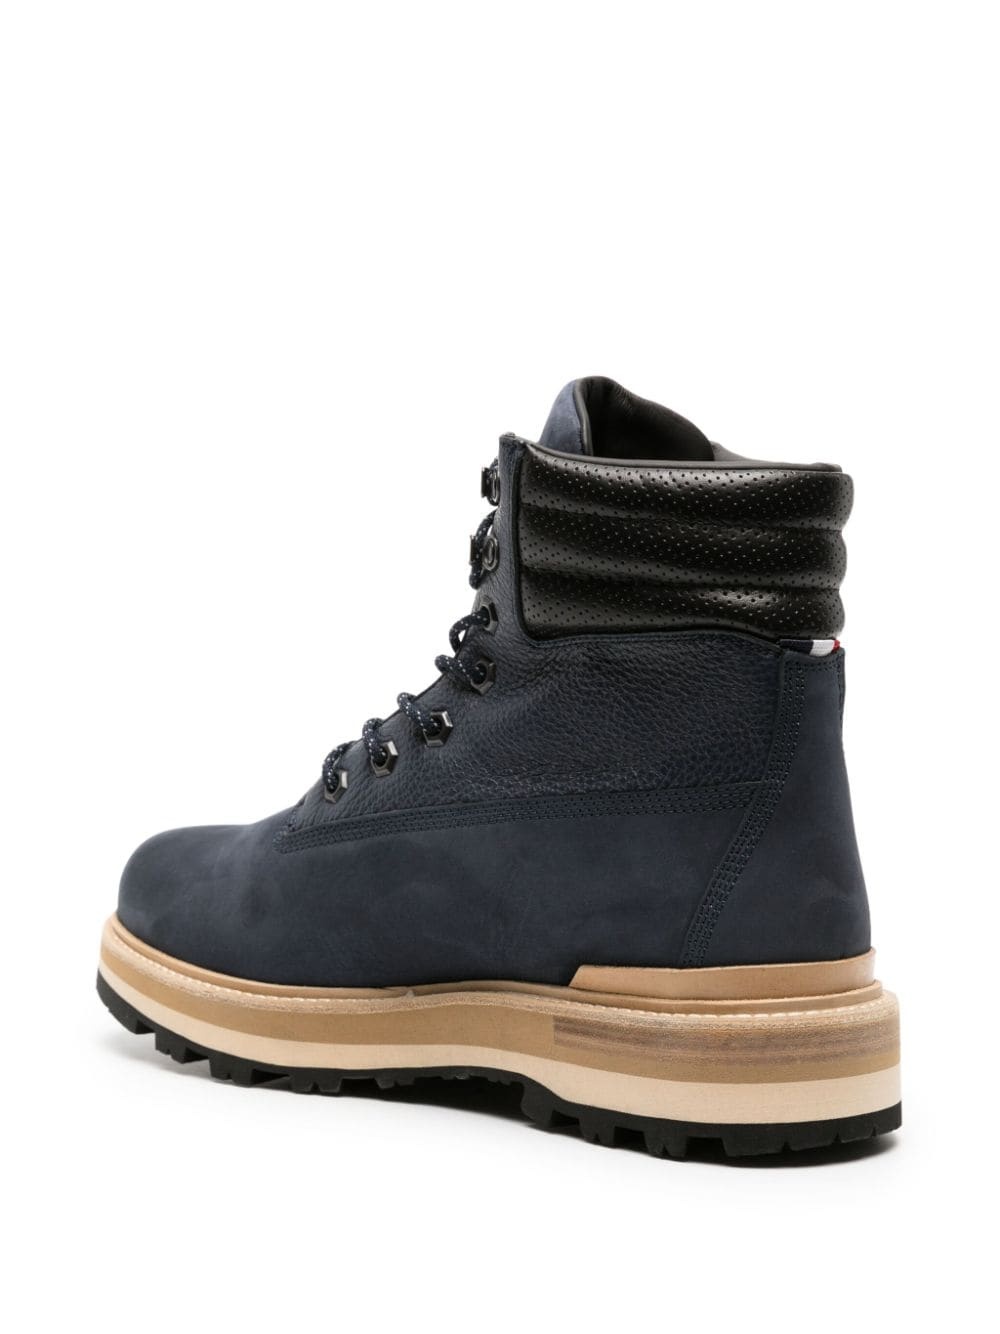 Peka suede hiking boots - 3